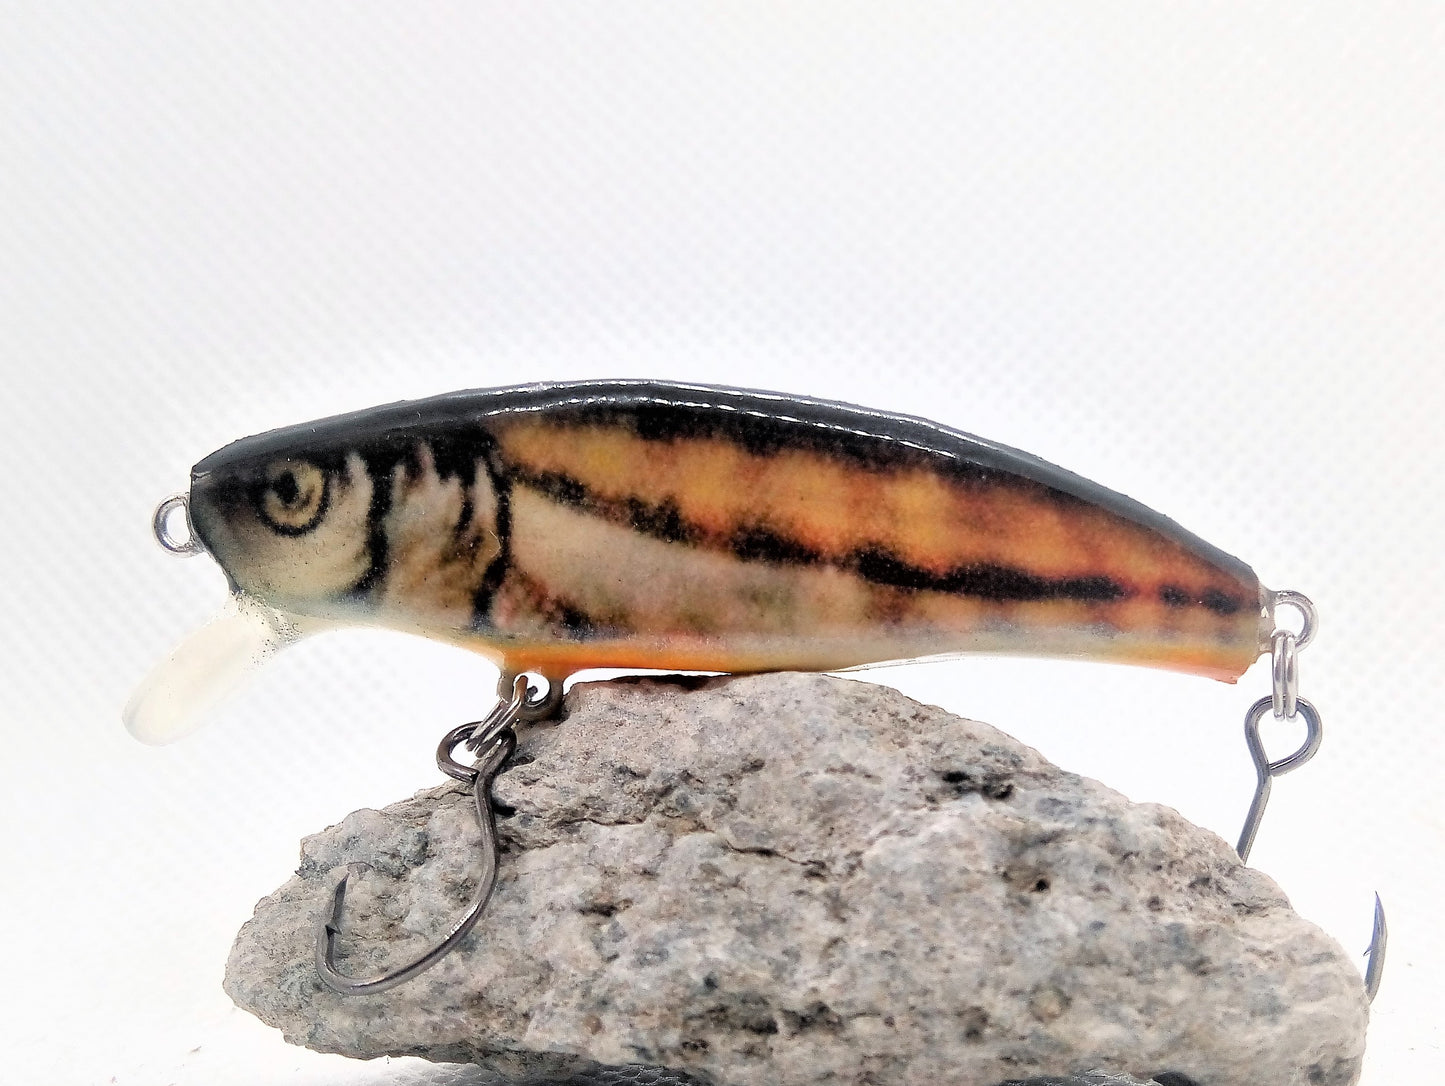 Realistic Minnow Sleeper - end of series